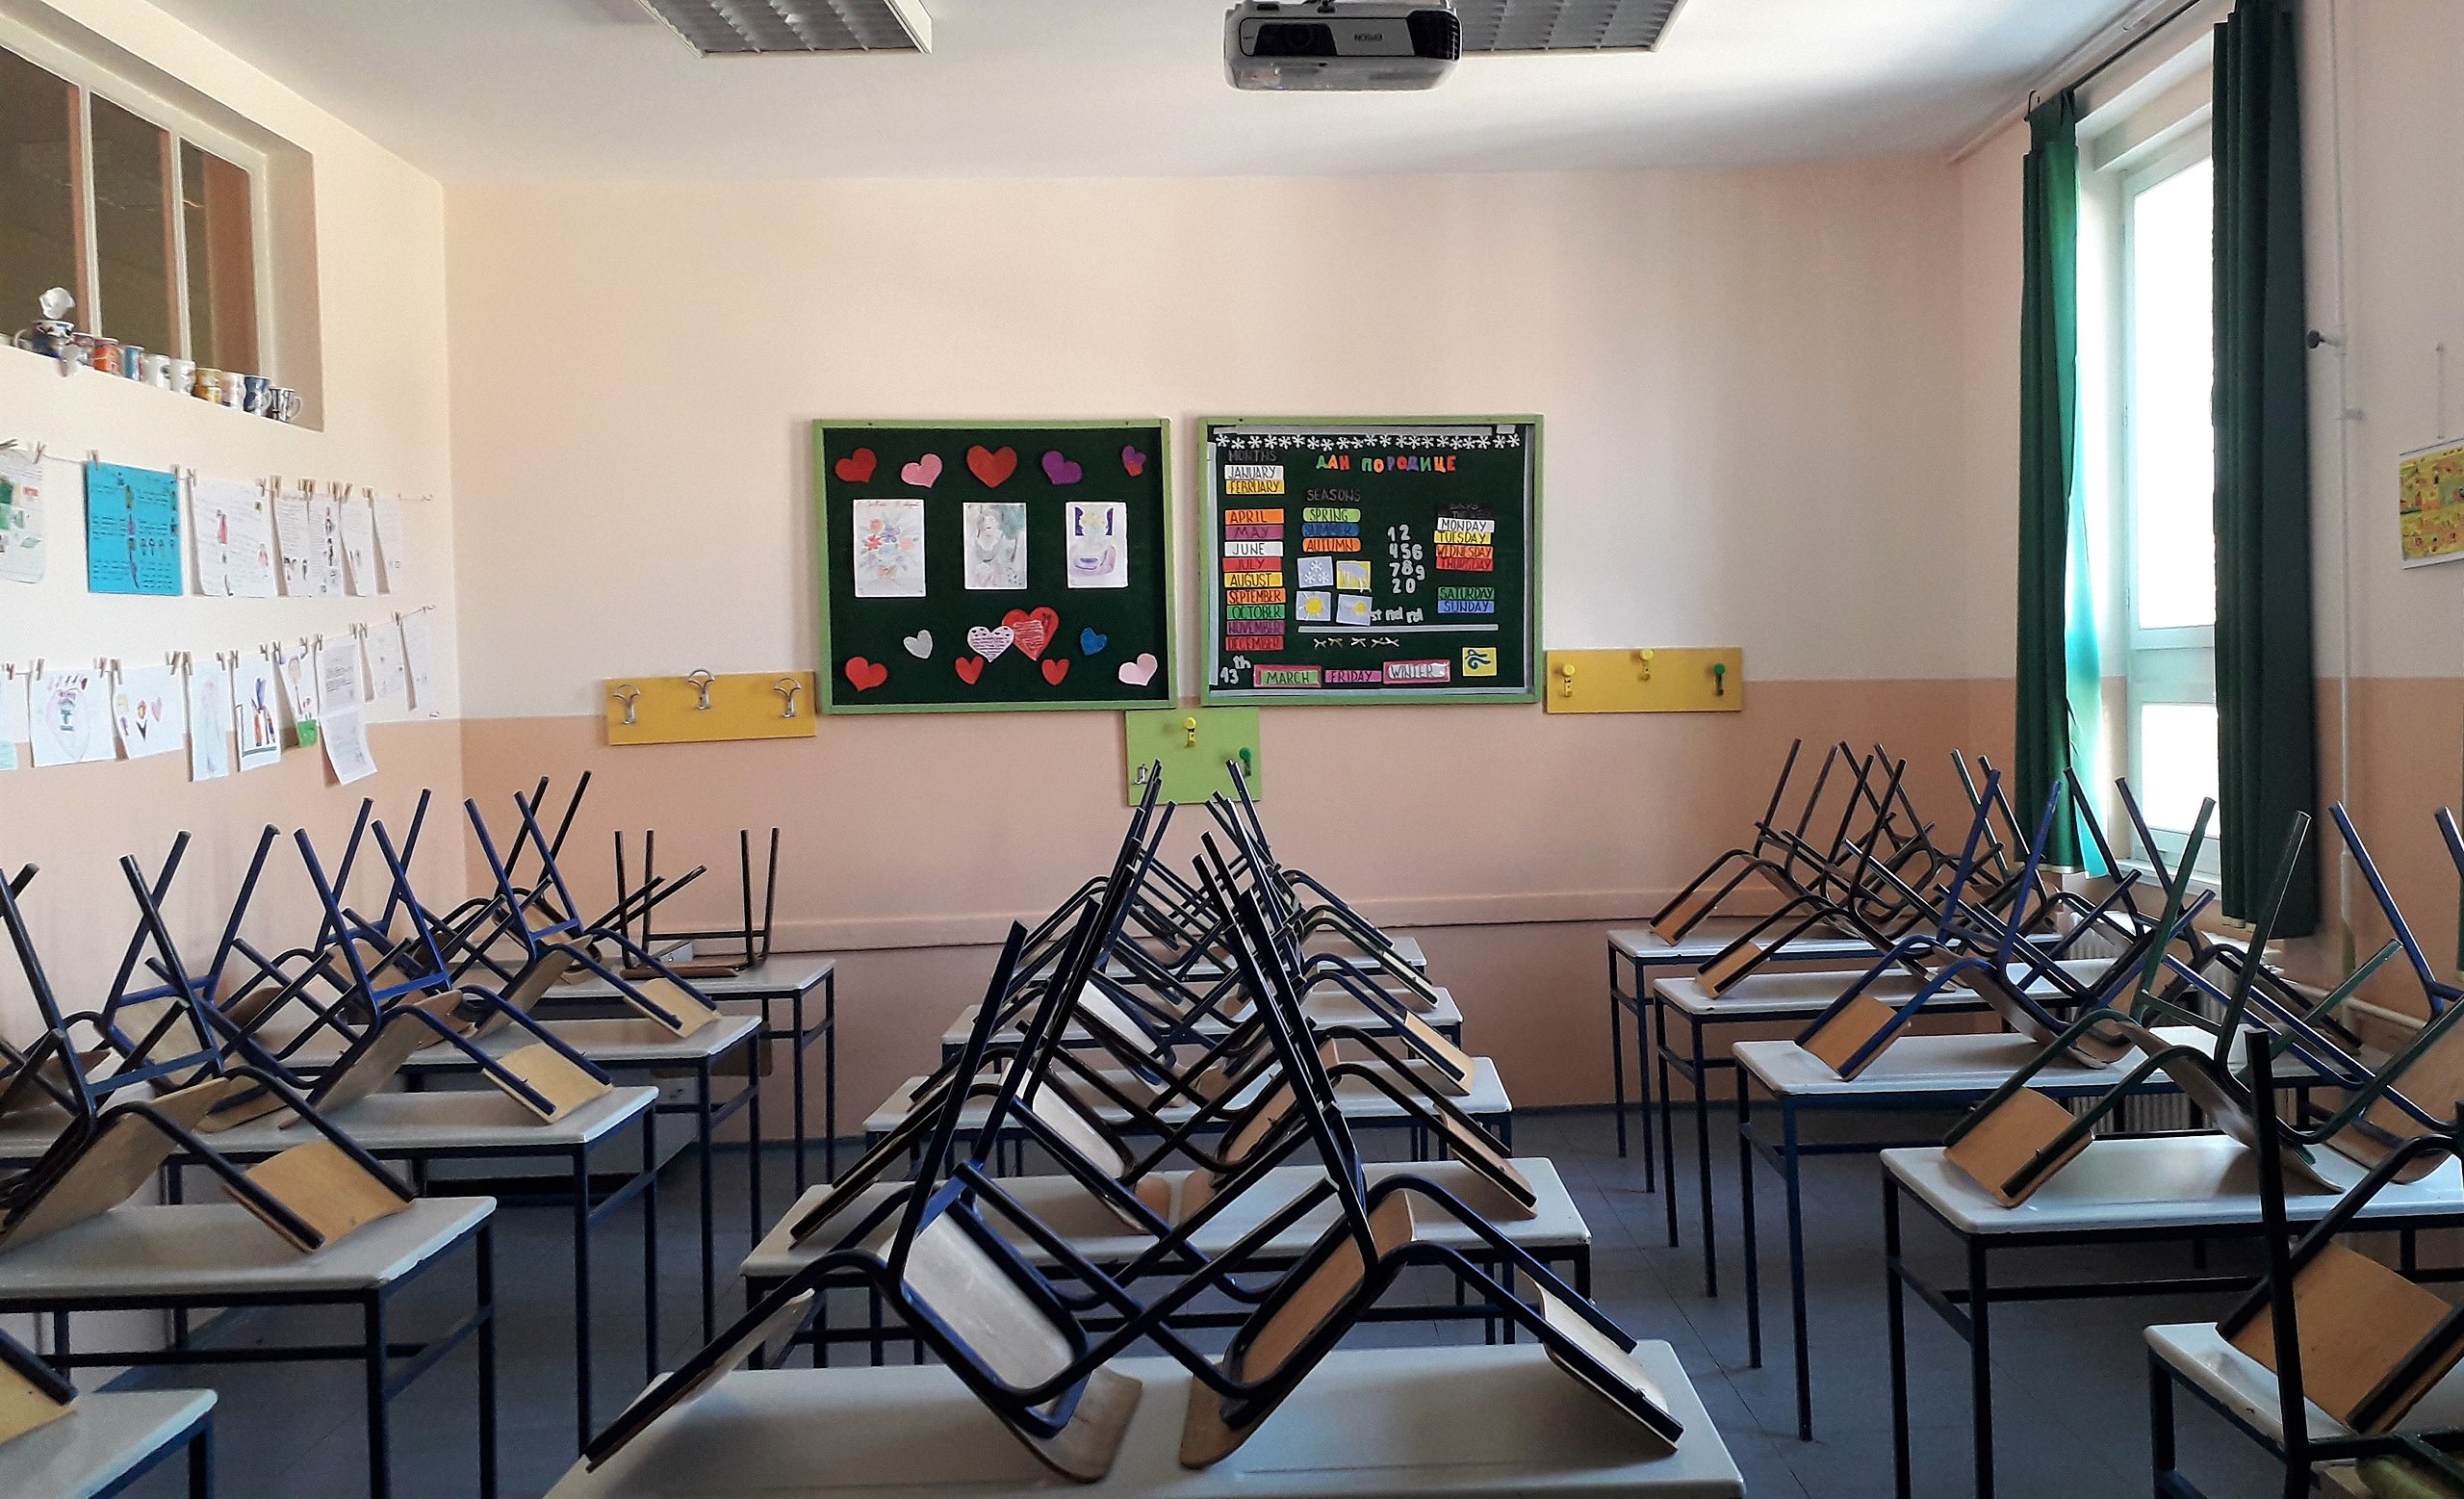 Image of a classroom with chairs stacked on top of the desks. Almost certainly not the one Kevin Lister was fired from.